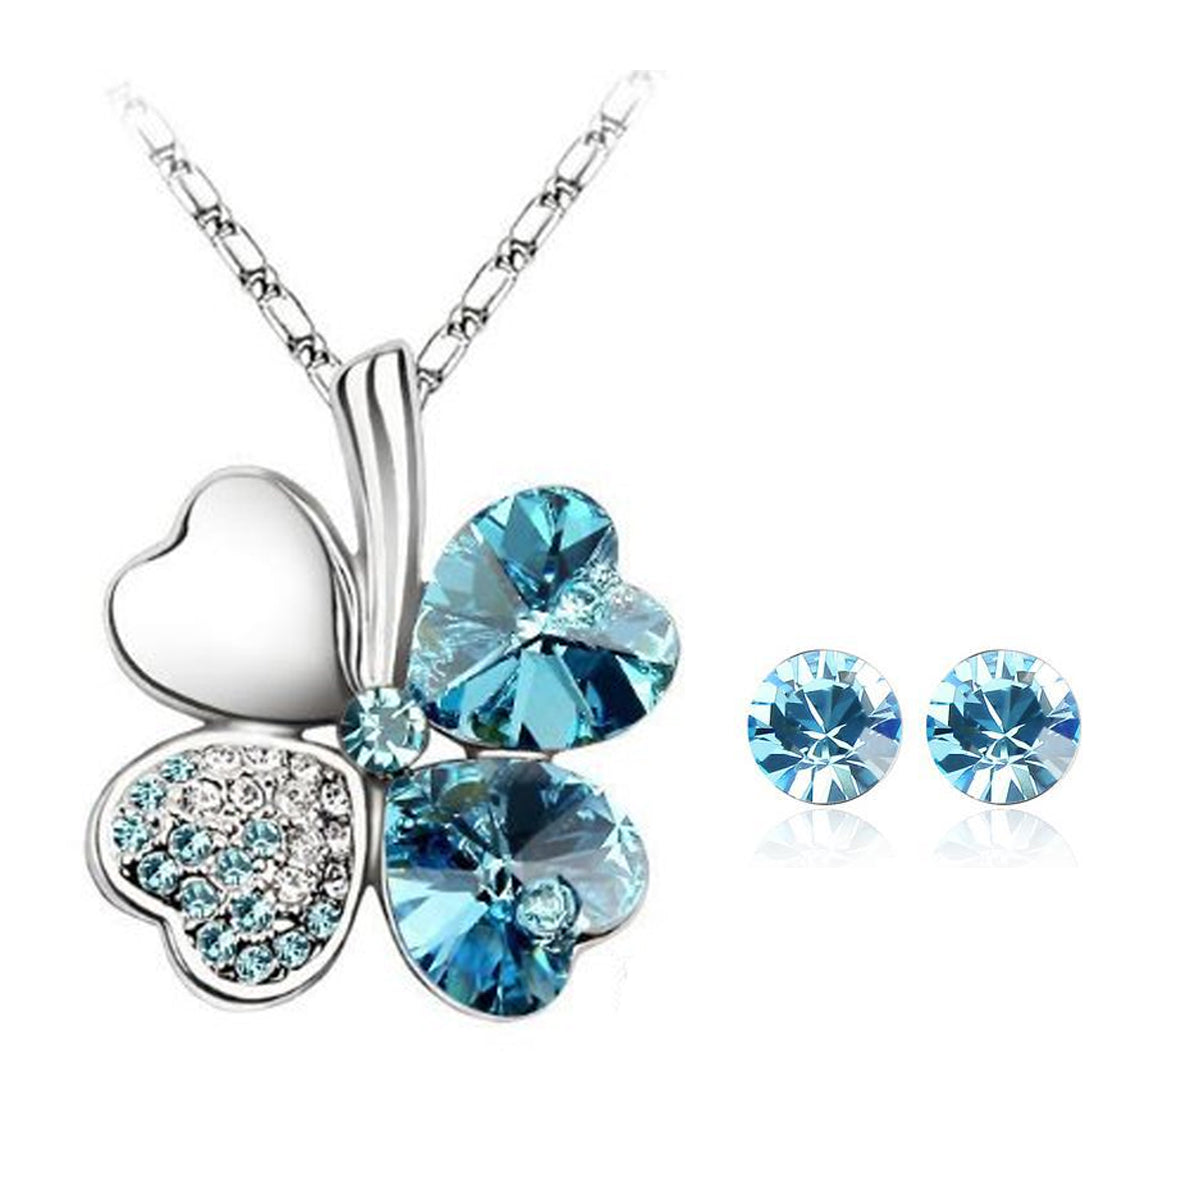 Gold Plated Crystal Heart Shaped Four Leaf Clover Pendant Necklace and Stud Earrings Jewelry Set (Sea Blue)